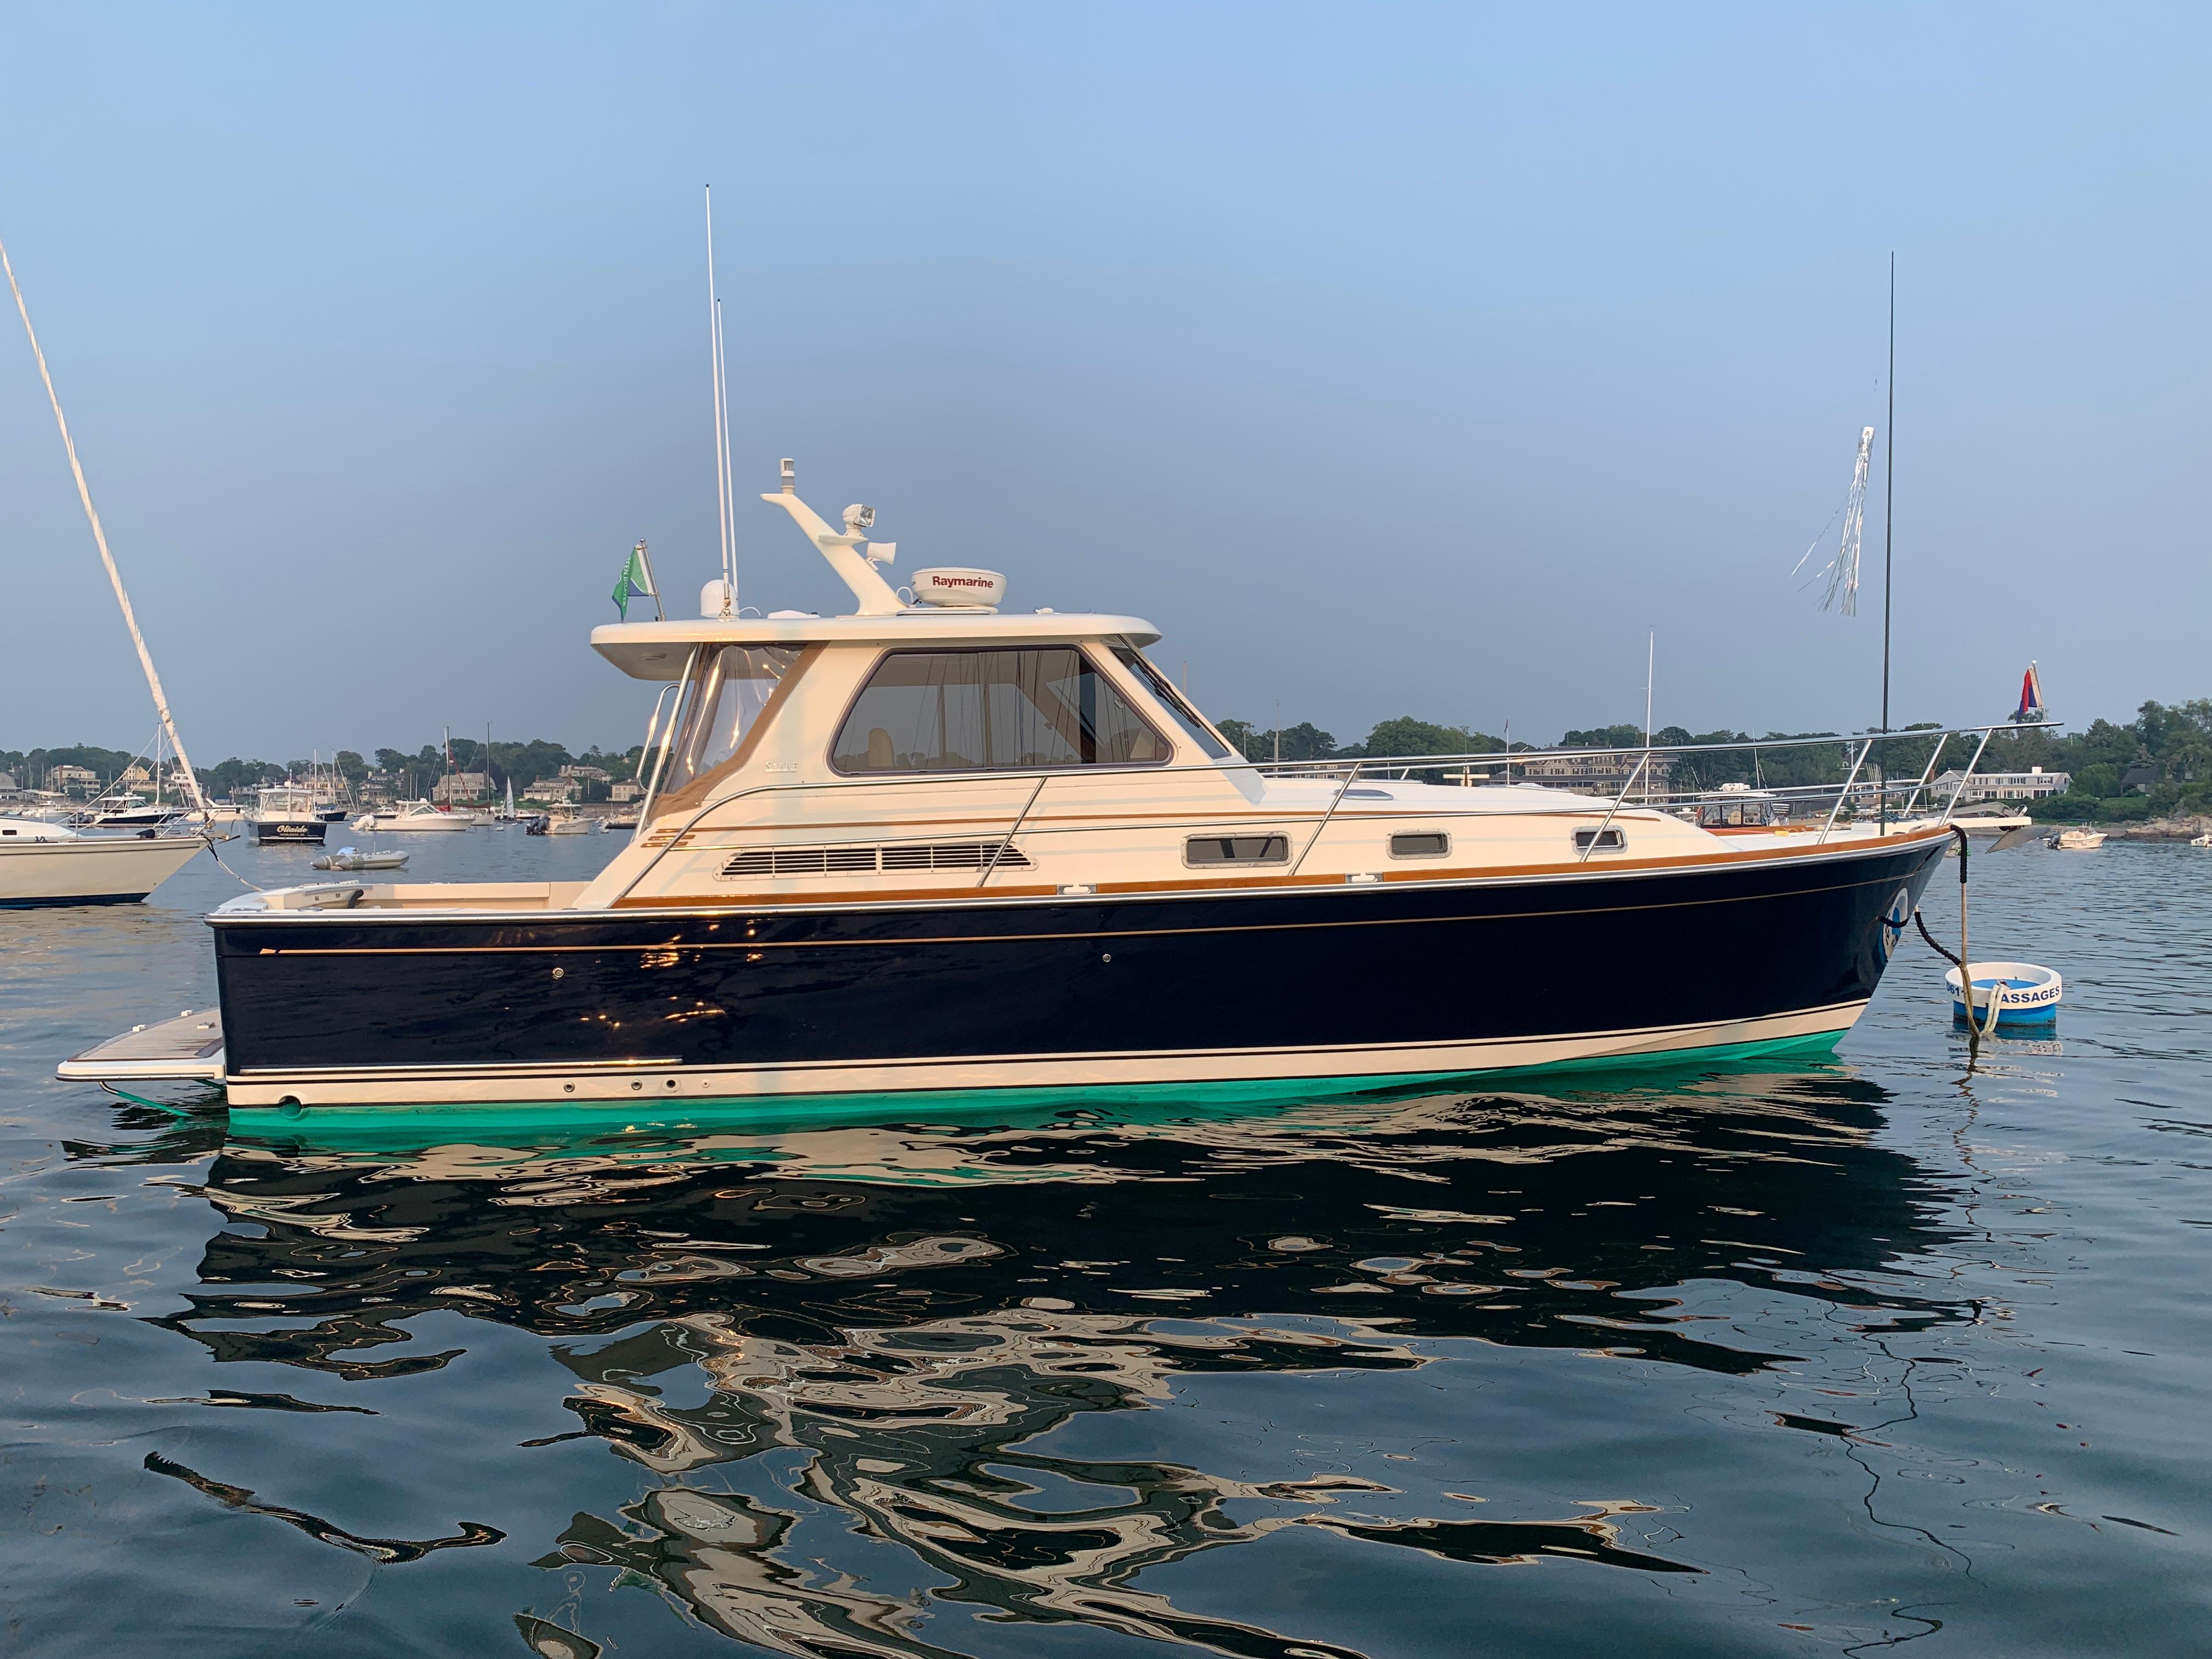 passages yacht for sale 38 sabre yachts marblehead, ma denison yacht sales